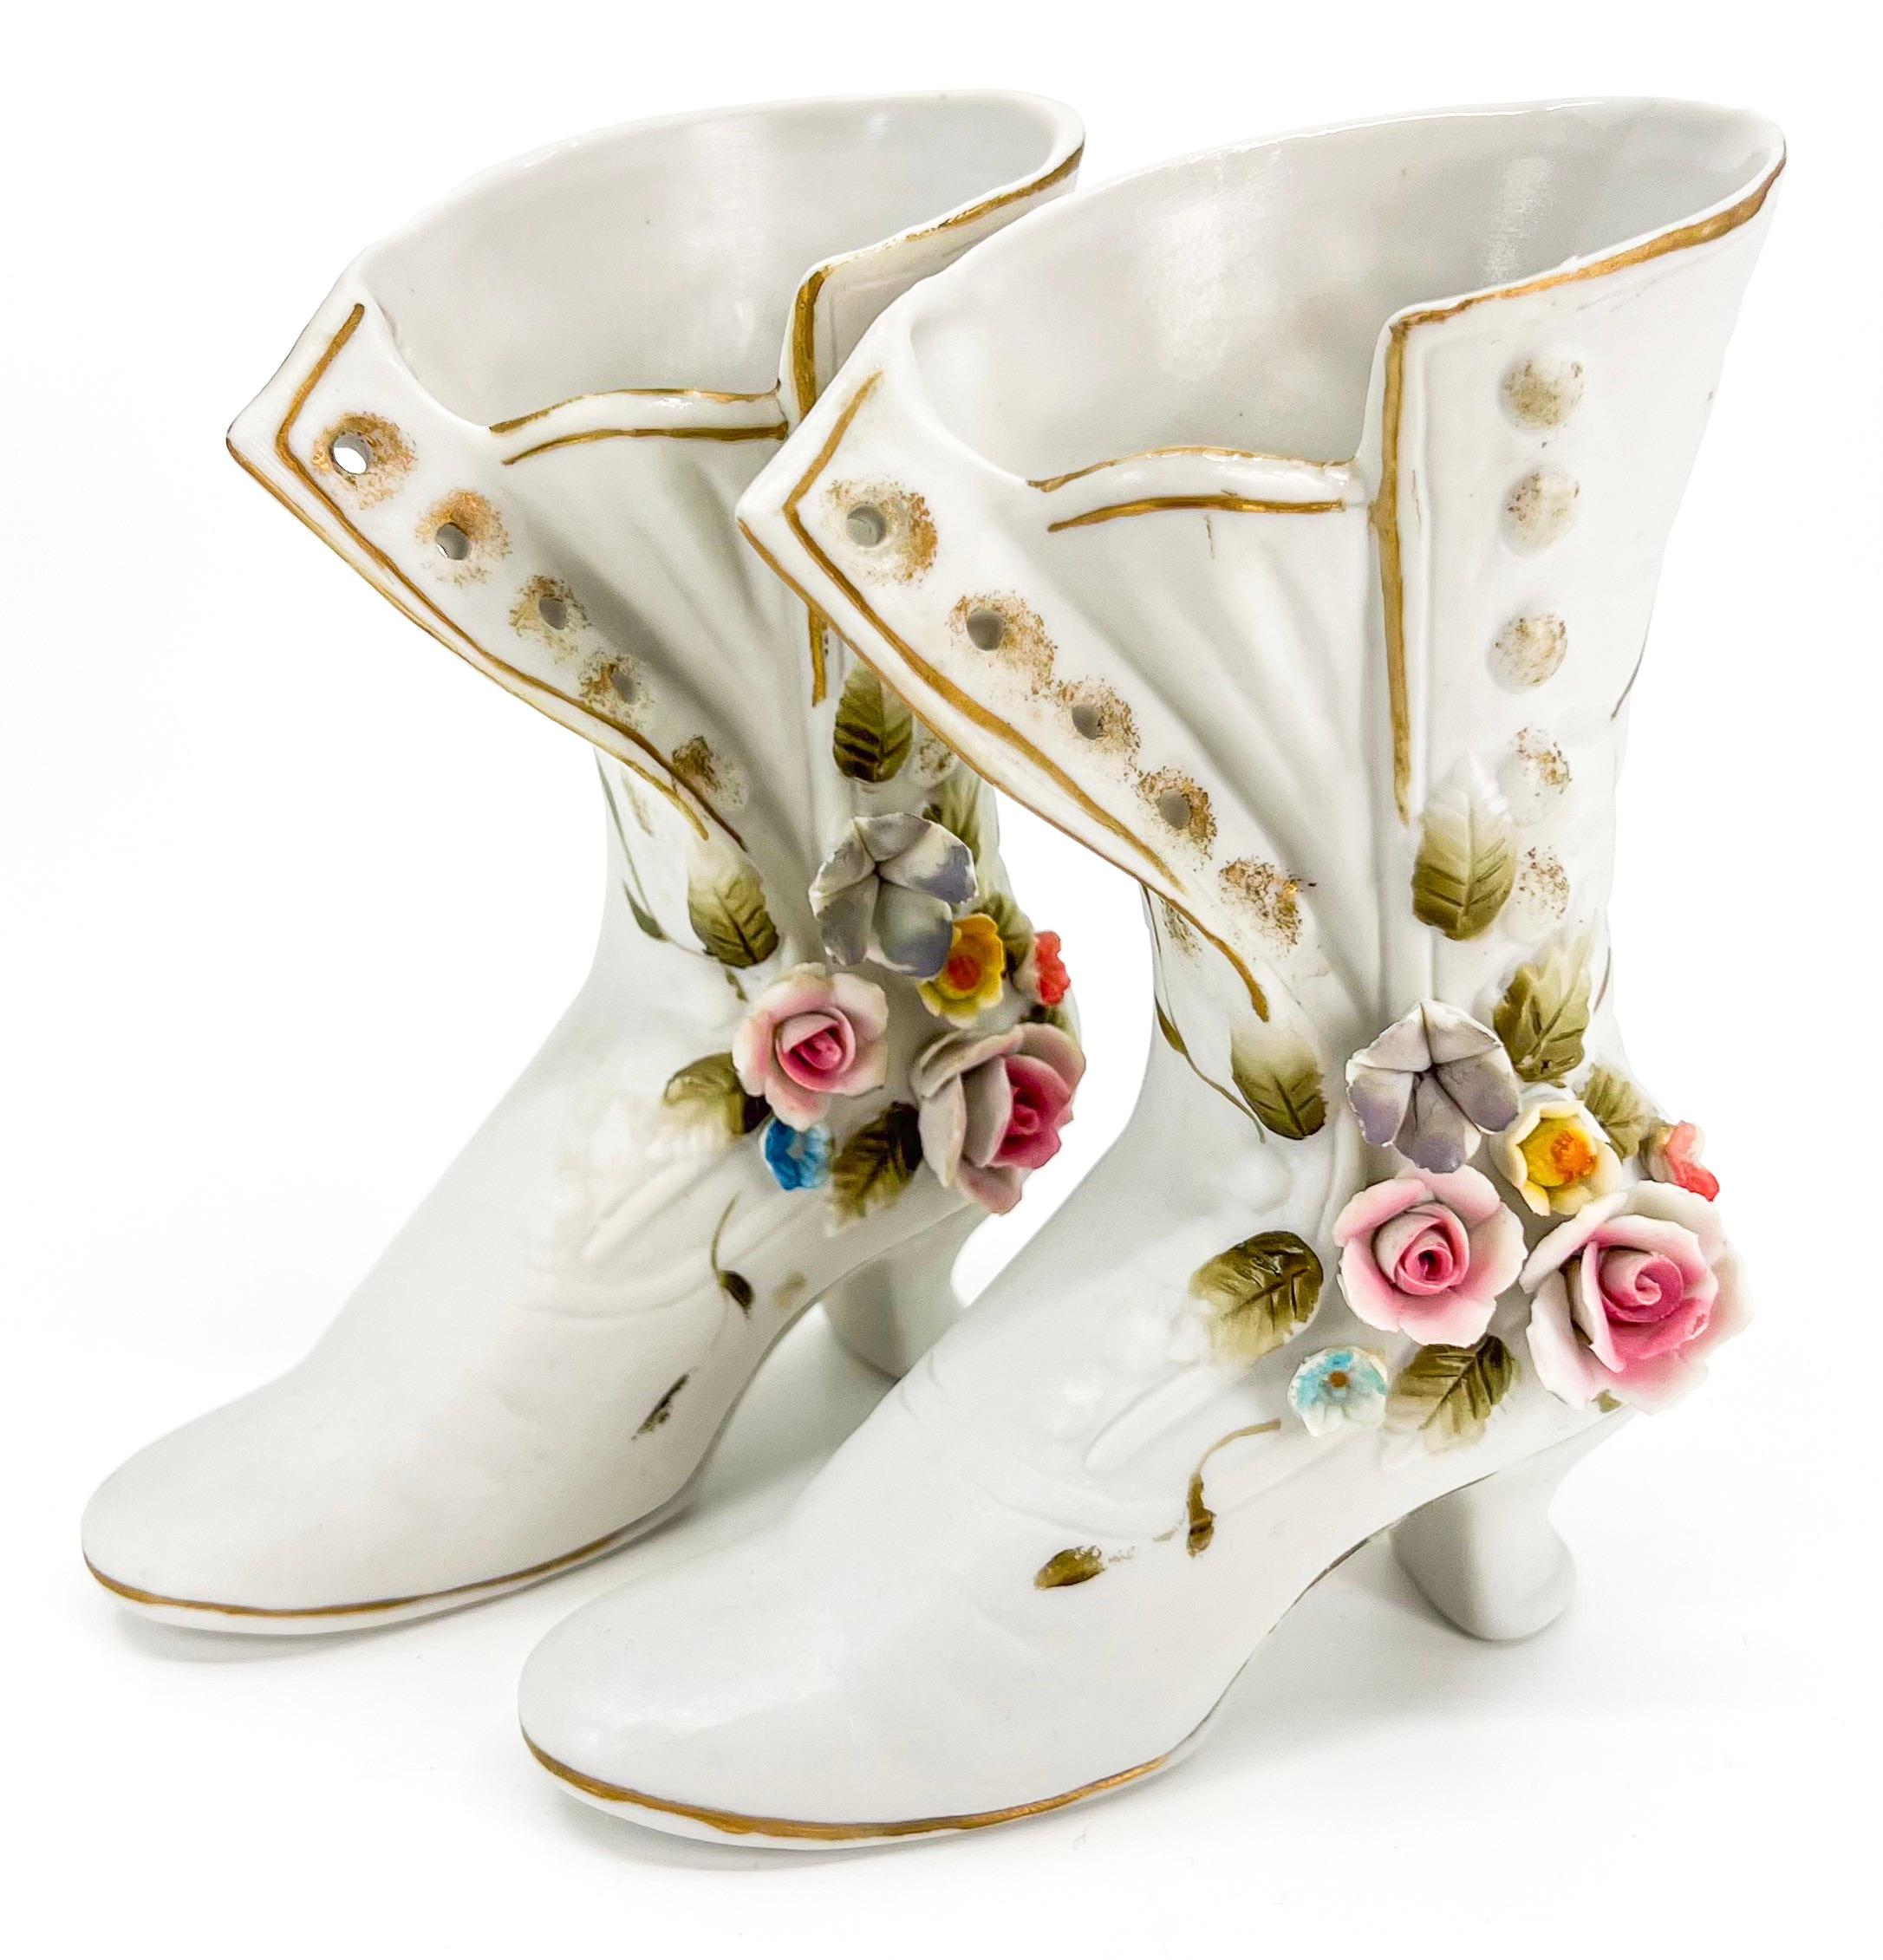 Pair of beautiful bisquit porcelain boots decorated with colorful flowers.
French hand painted and gilt bisque porcelain miniature shoe with flowers in relief made by Villenauxe during the 1900's.

Height 17 cm.